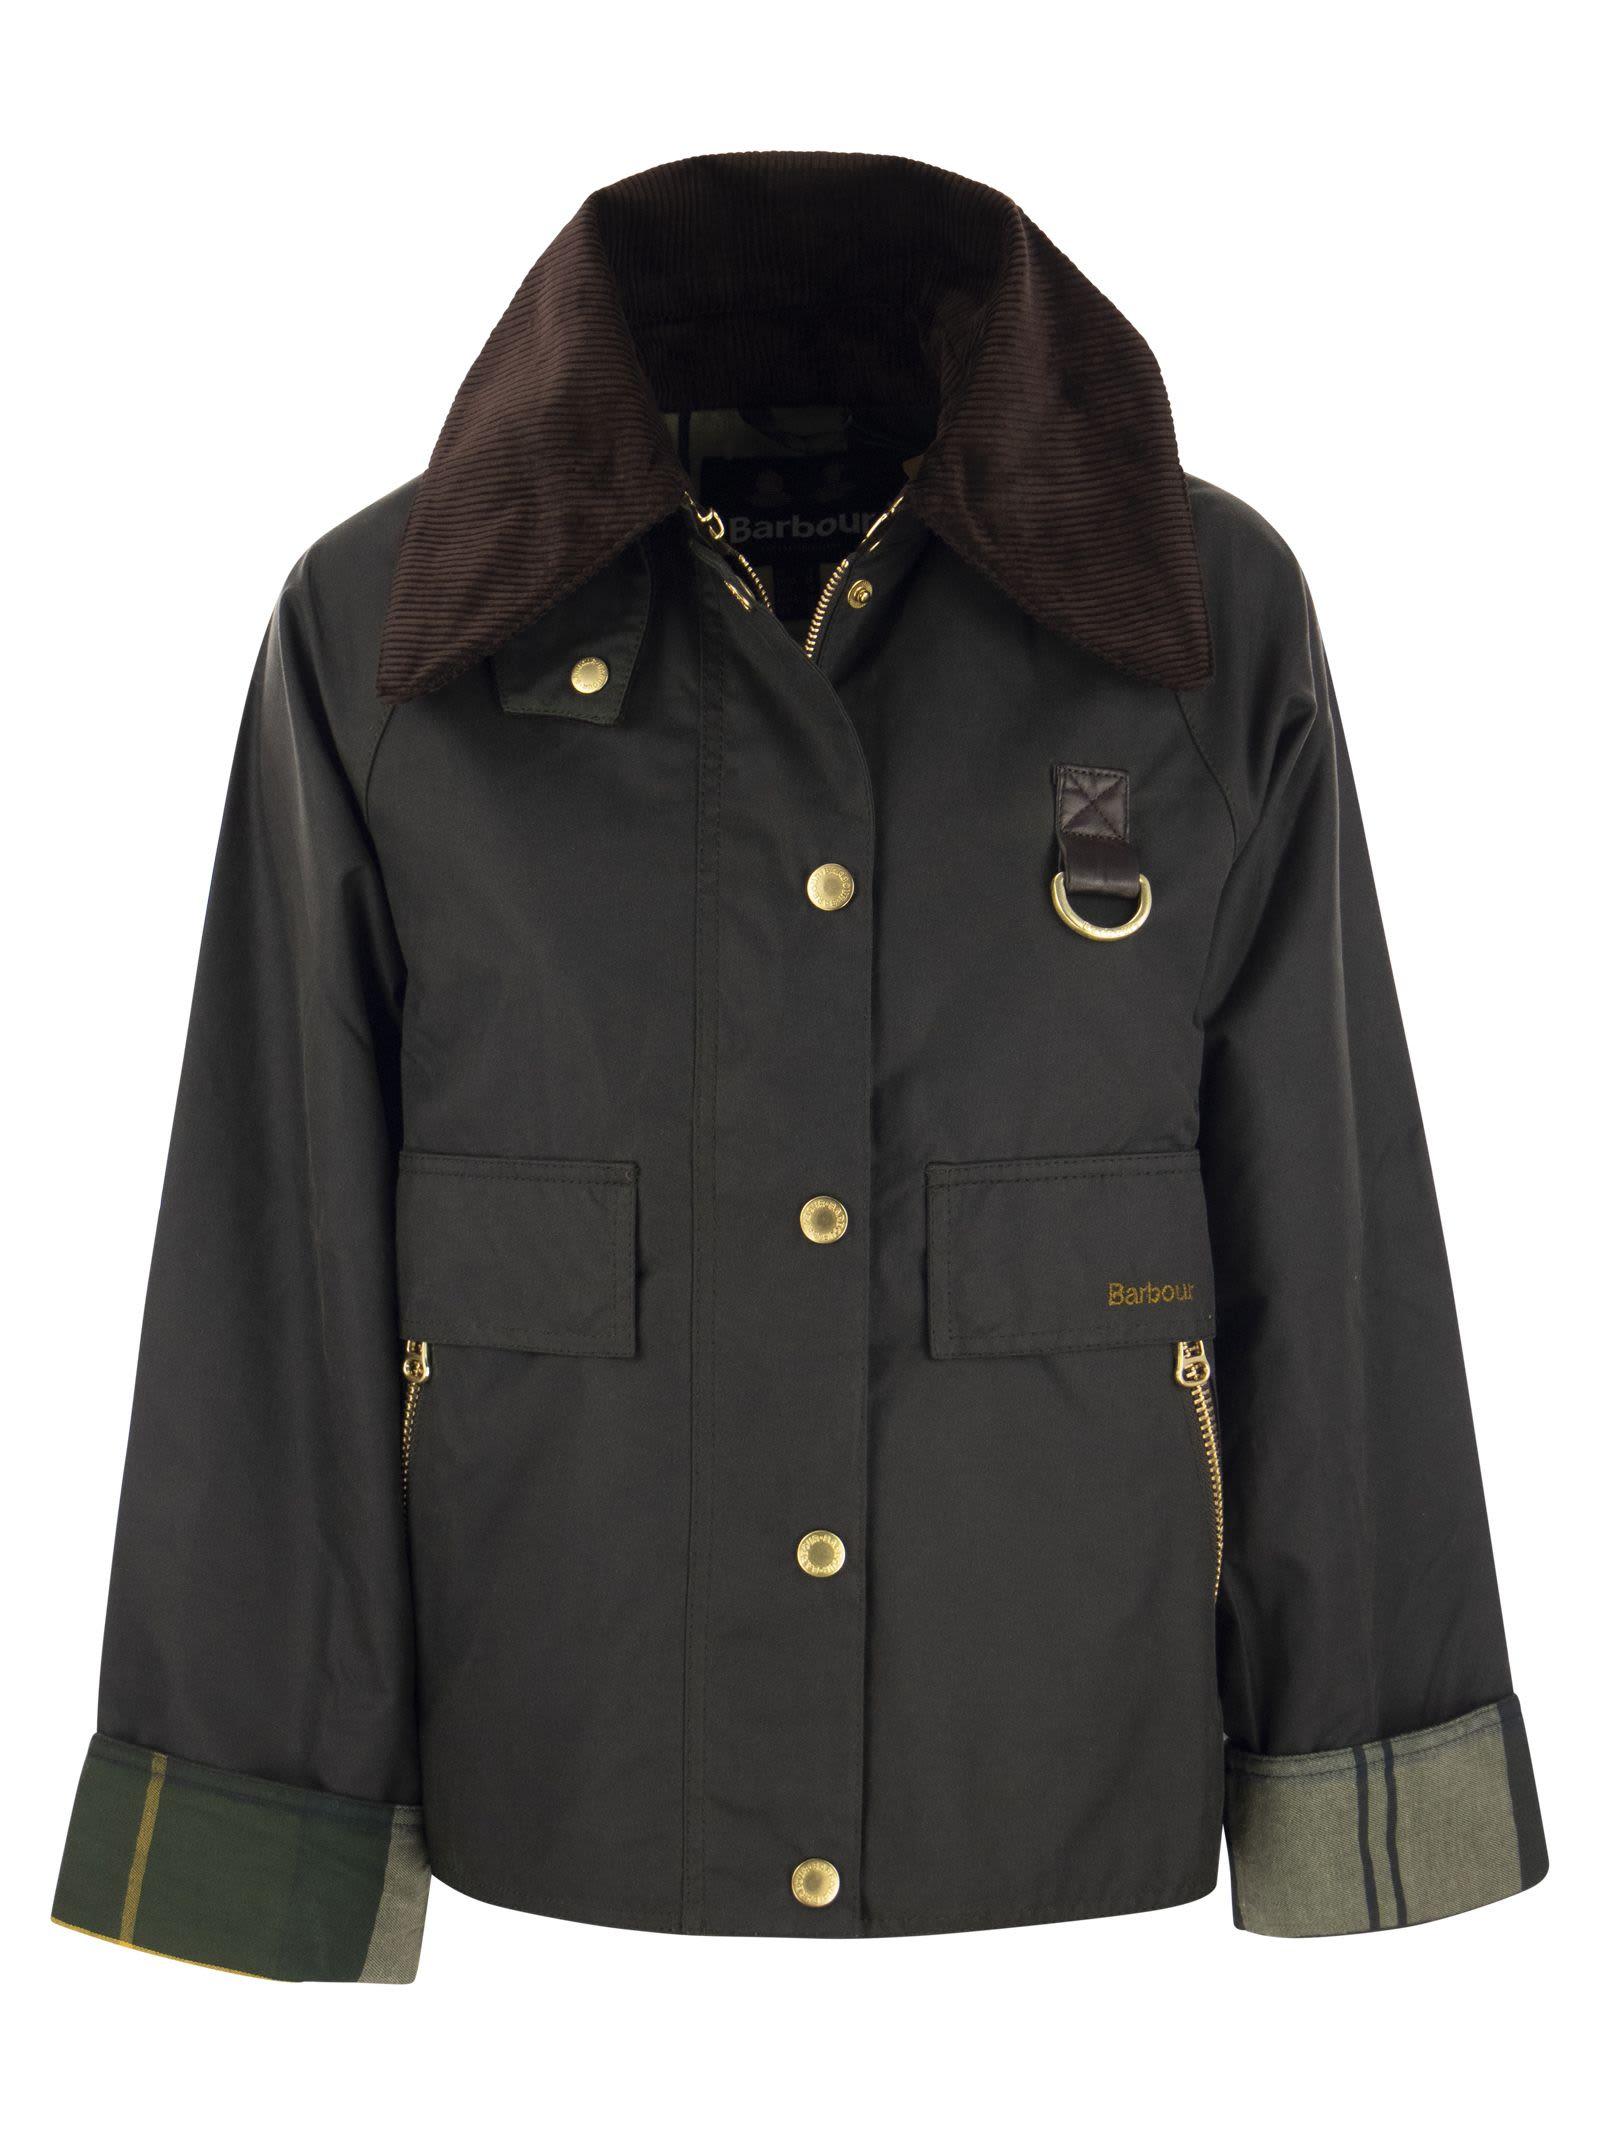 Barbour Catton - Waxed Jacket in Black | Lyst